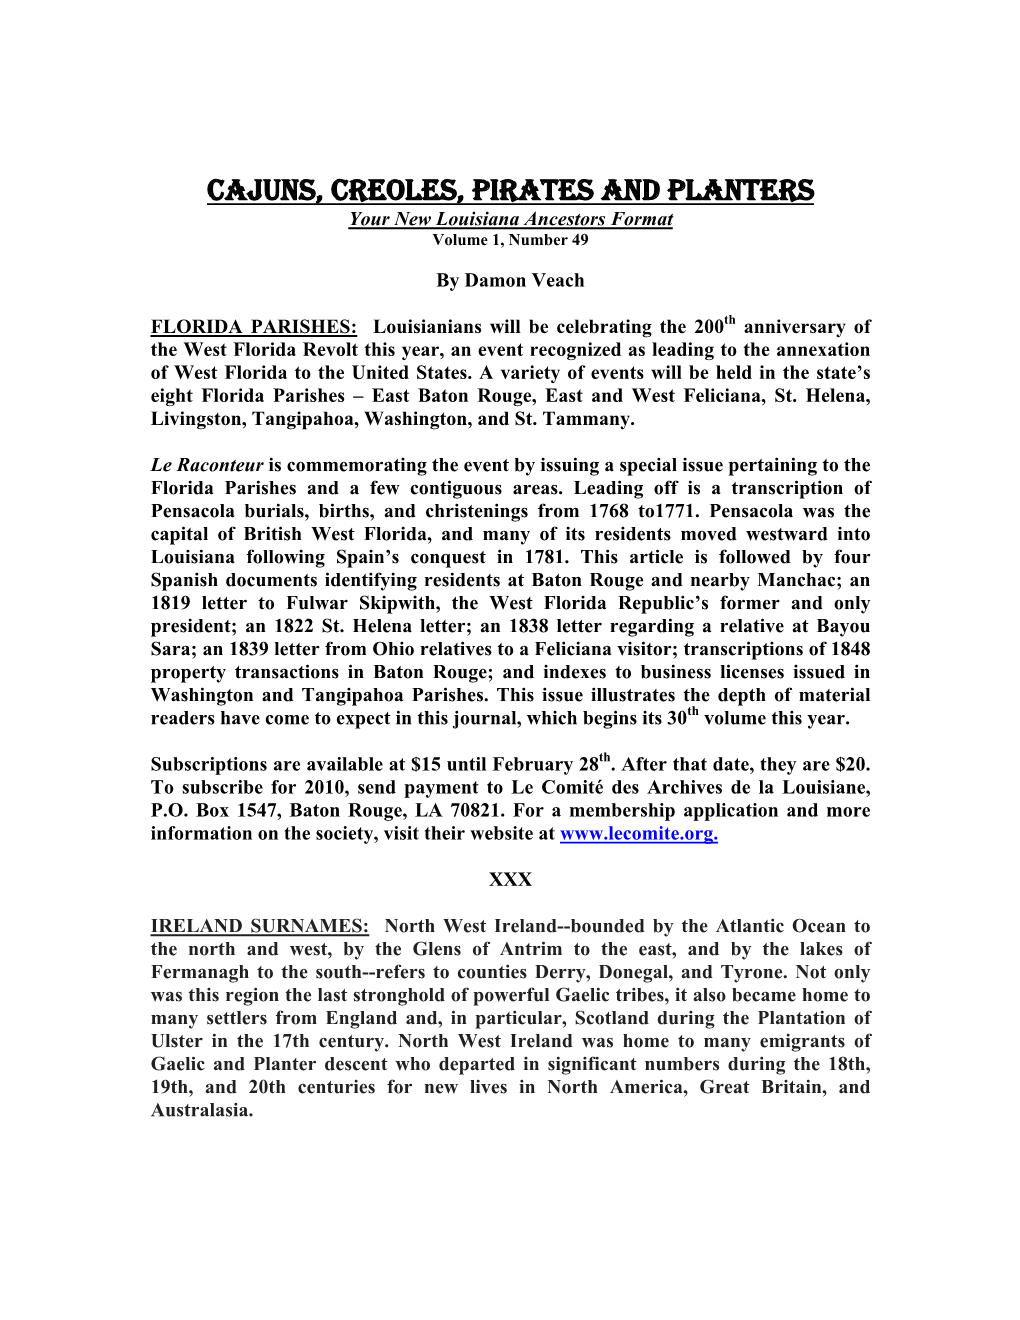 CAJUNS, CREOLES, PIRATES and PLANTERS Your New Louisiana Ancestors Format Volume 1, Number 49